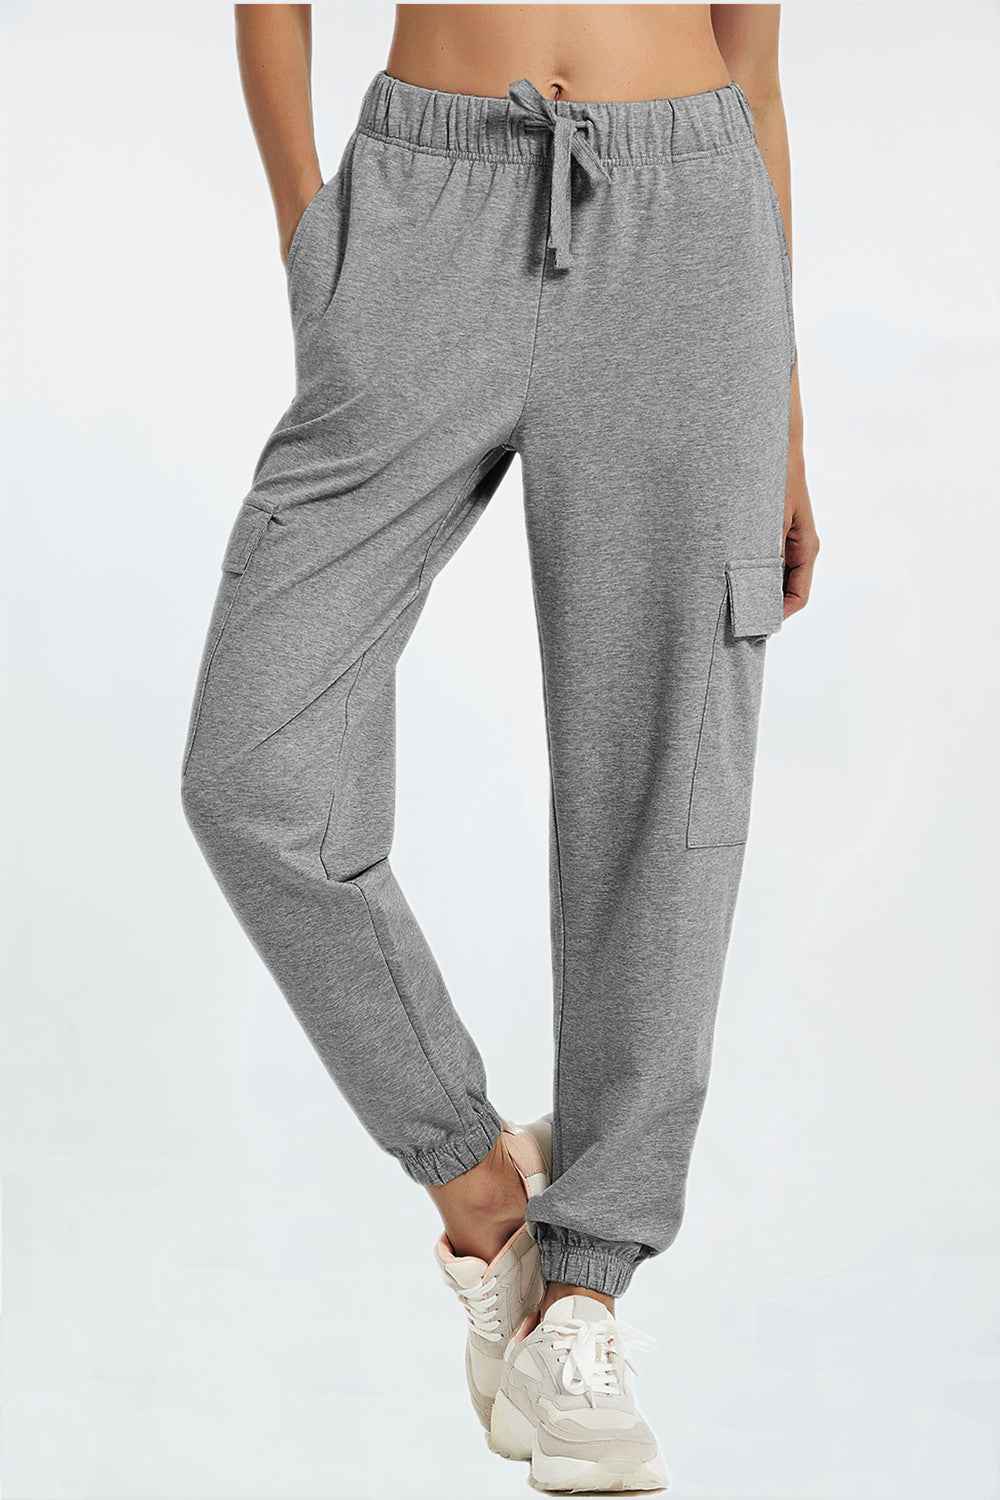 Cargo Sweat Pants for Women Wide Leg Joggers with Large Pockets by PULI  Black Gray